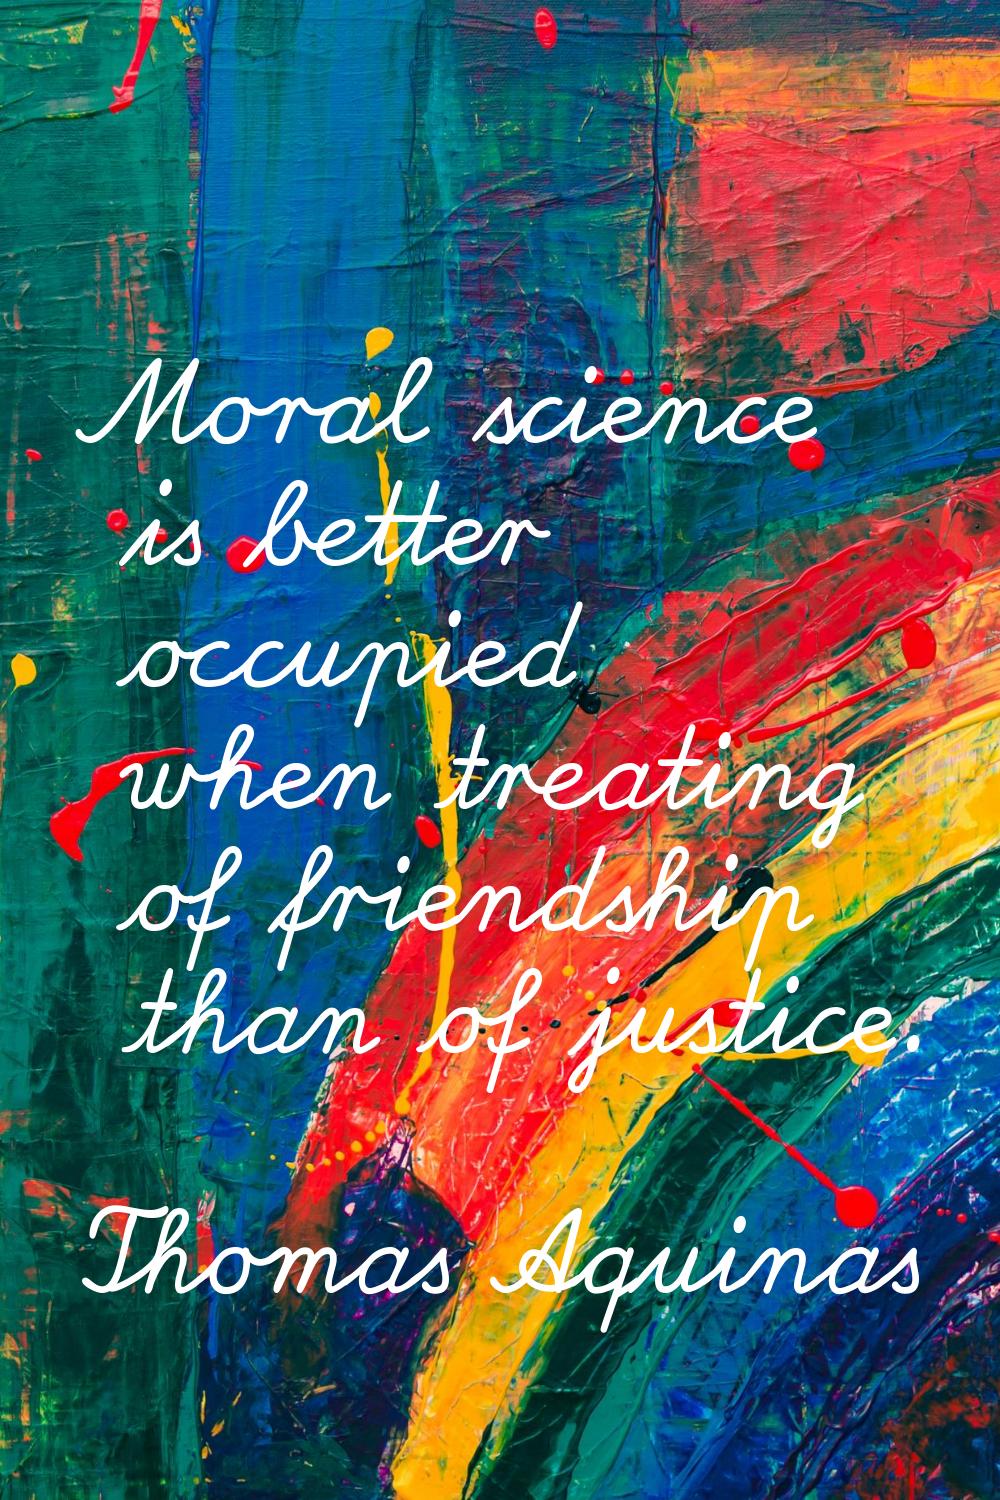 Moral science is better occupied when treating of friendship than of justice.